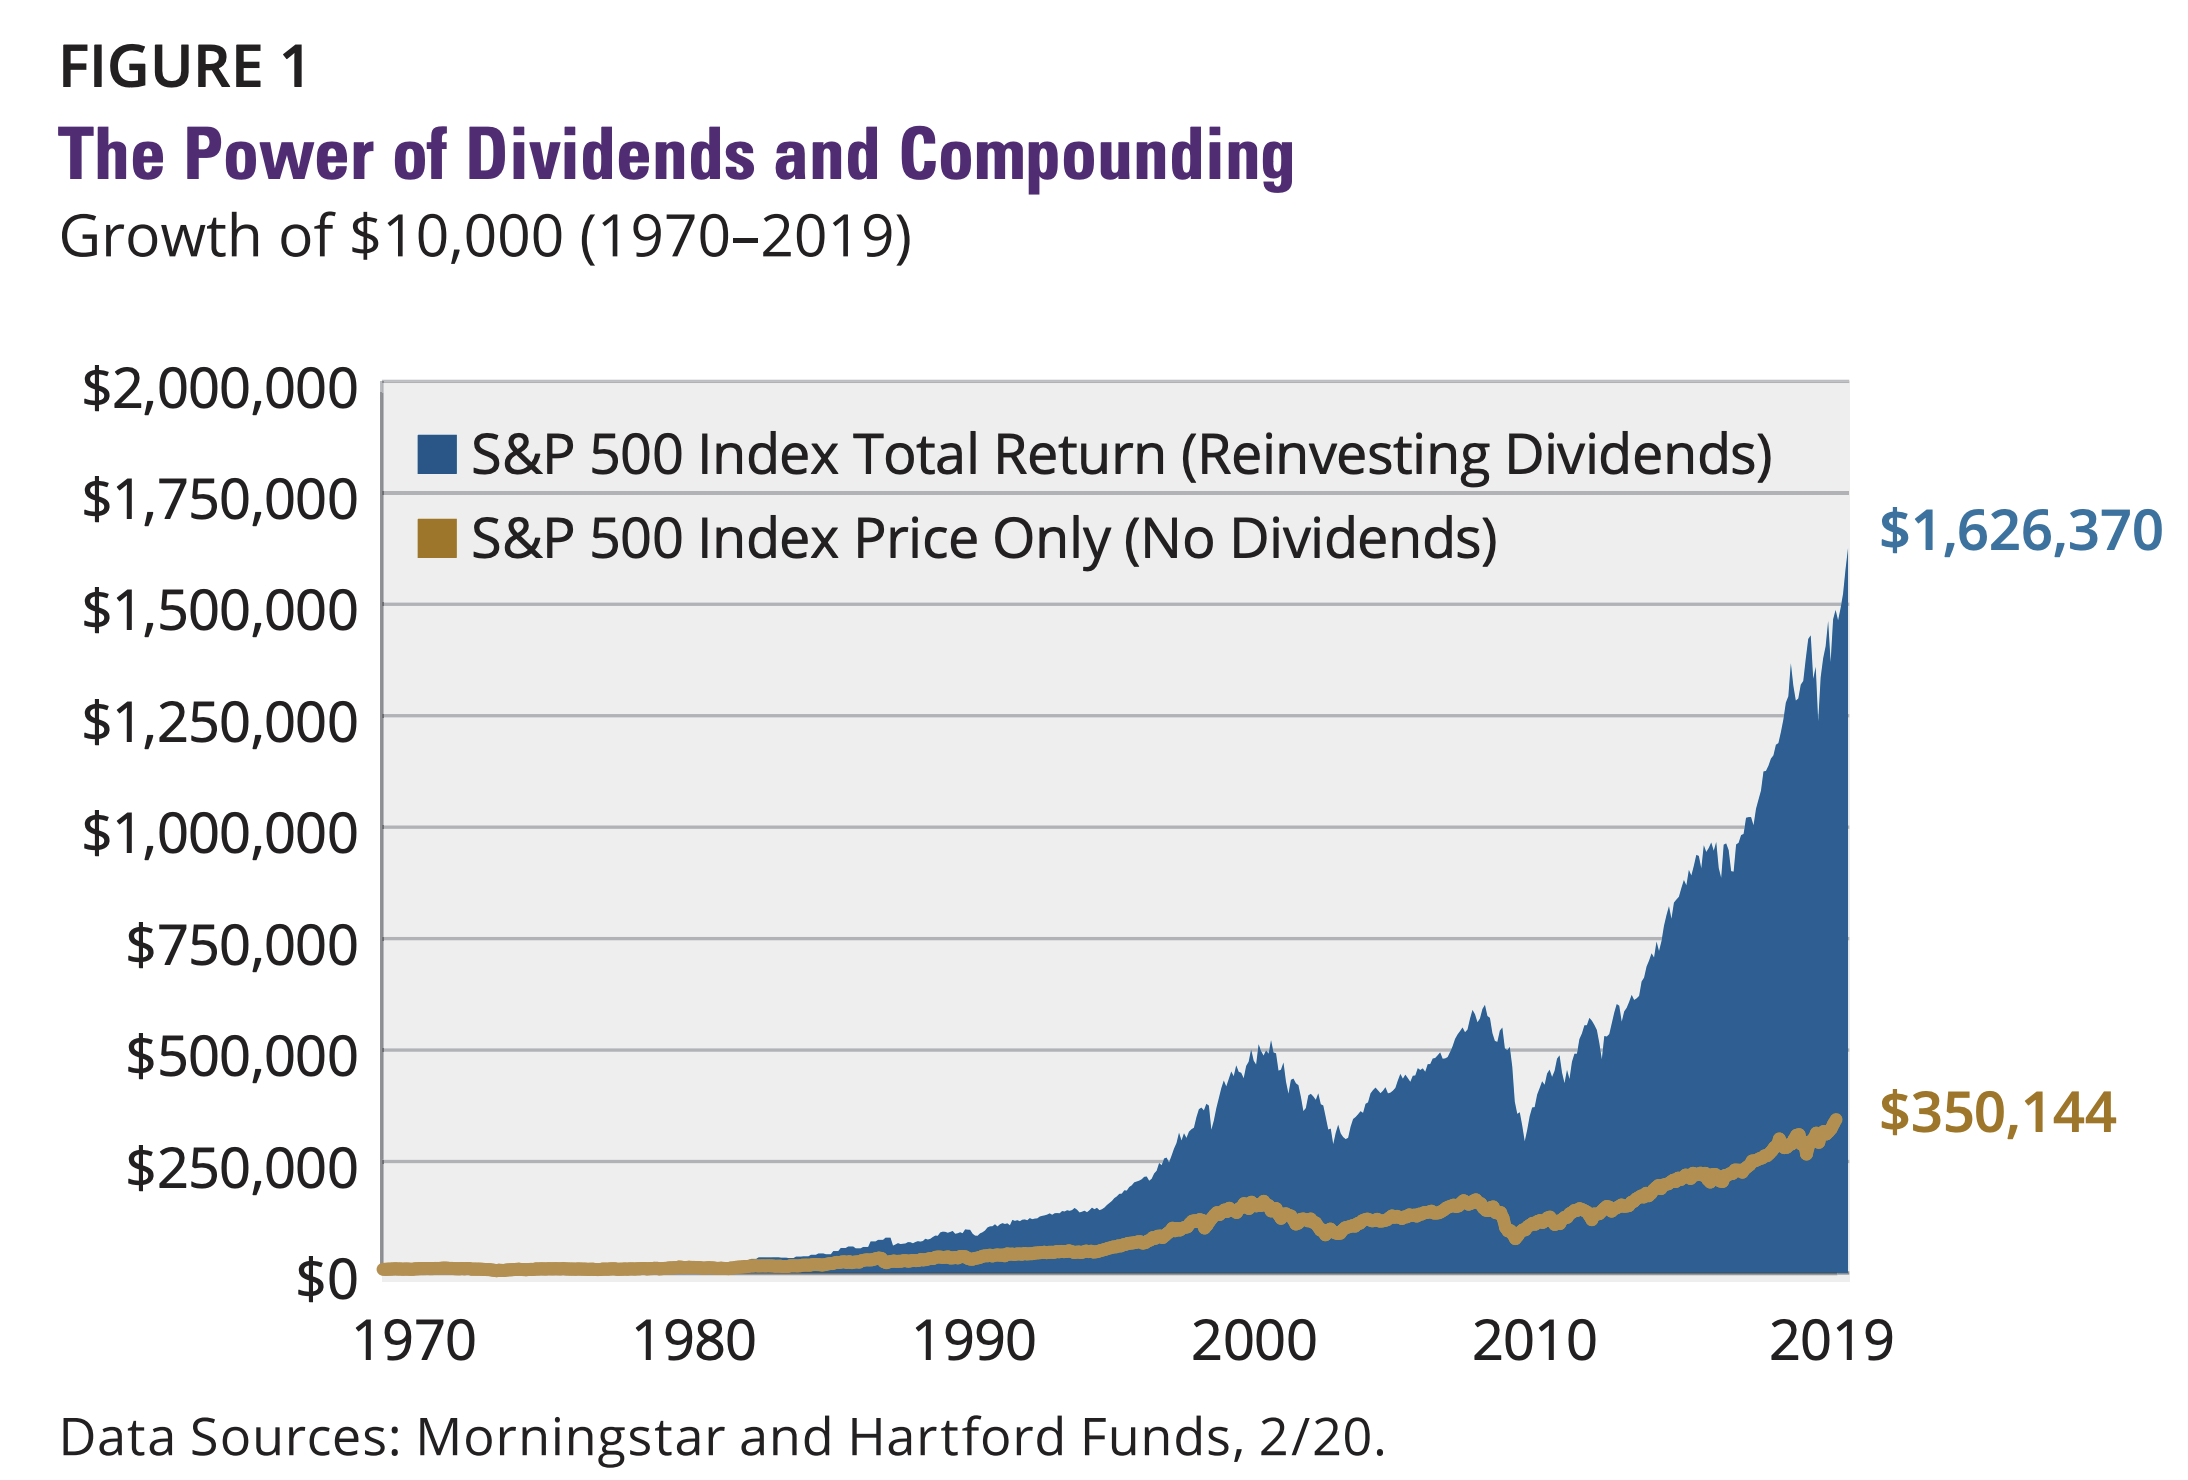 Graph showing the growth of the S&P500 over the past 50 years including dividend reinvestment